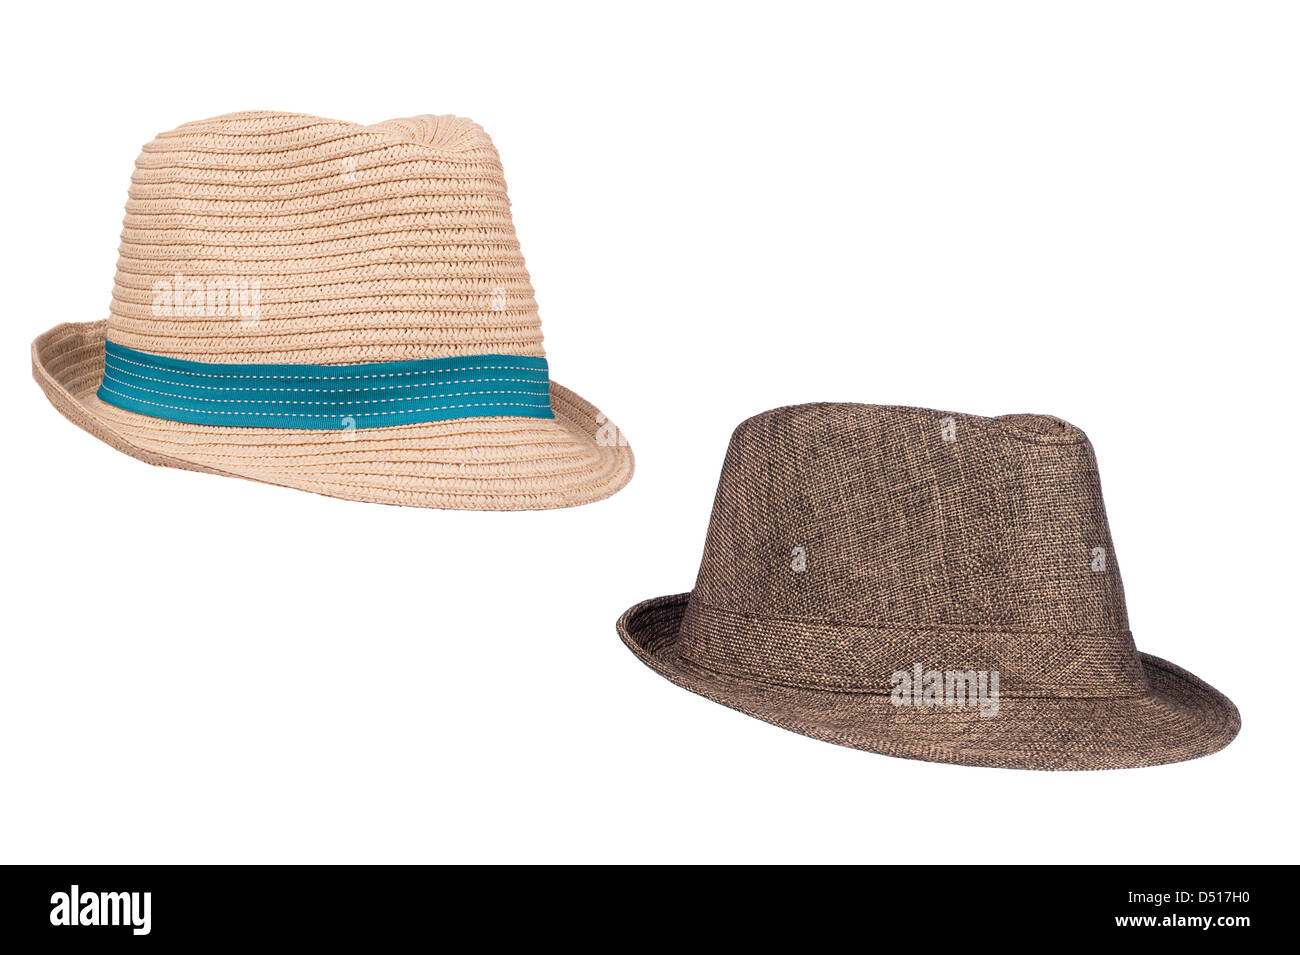 Two isolated fedora sun hats for use as retro revival clothing objects or any other head wear inferences. Stock Photo